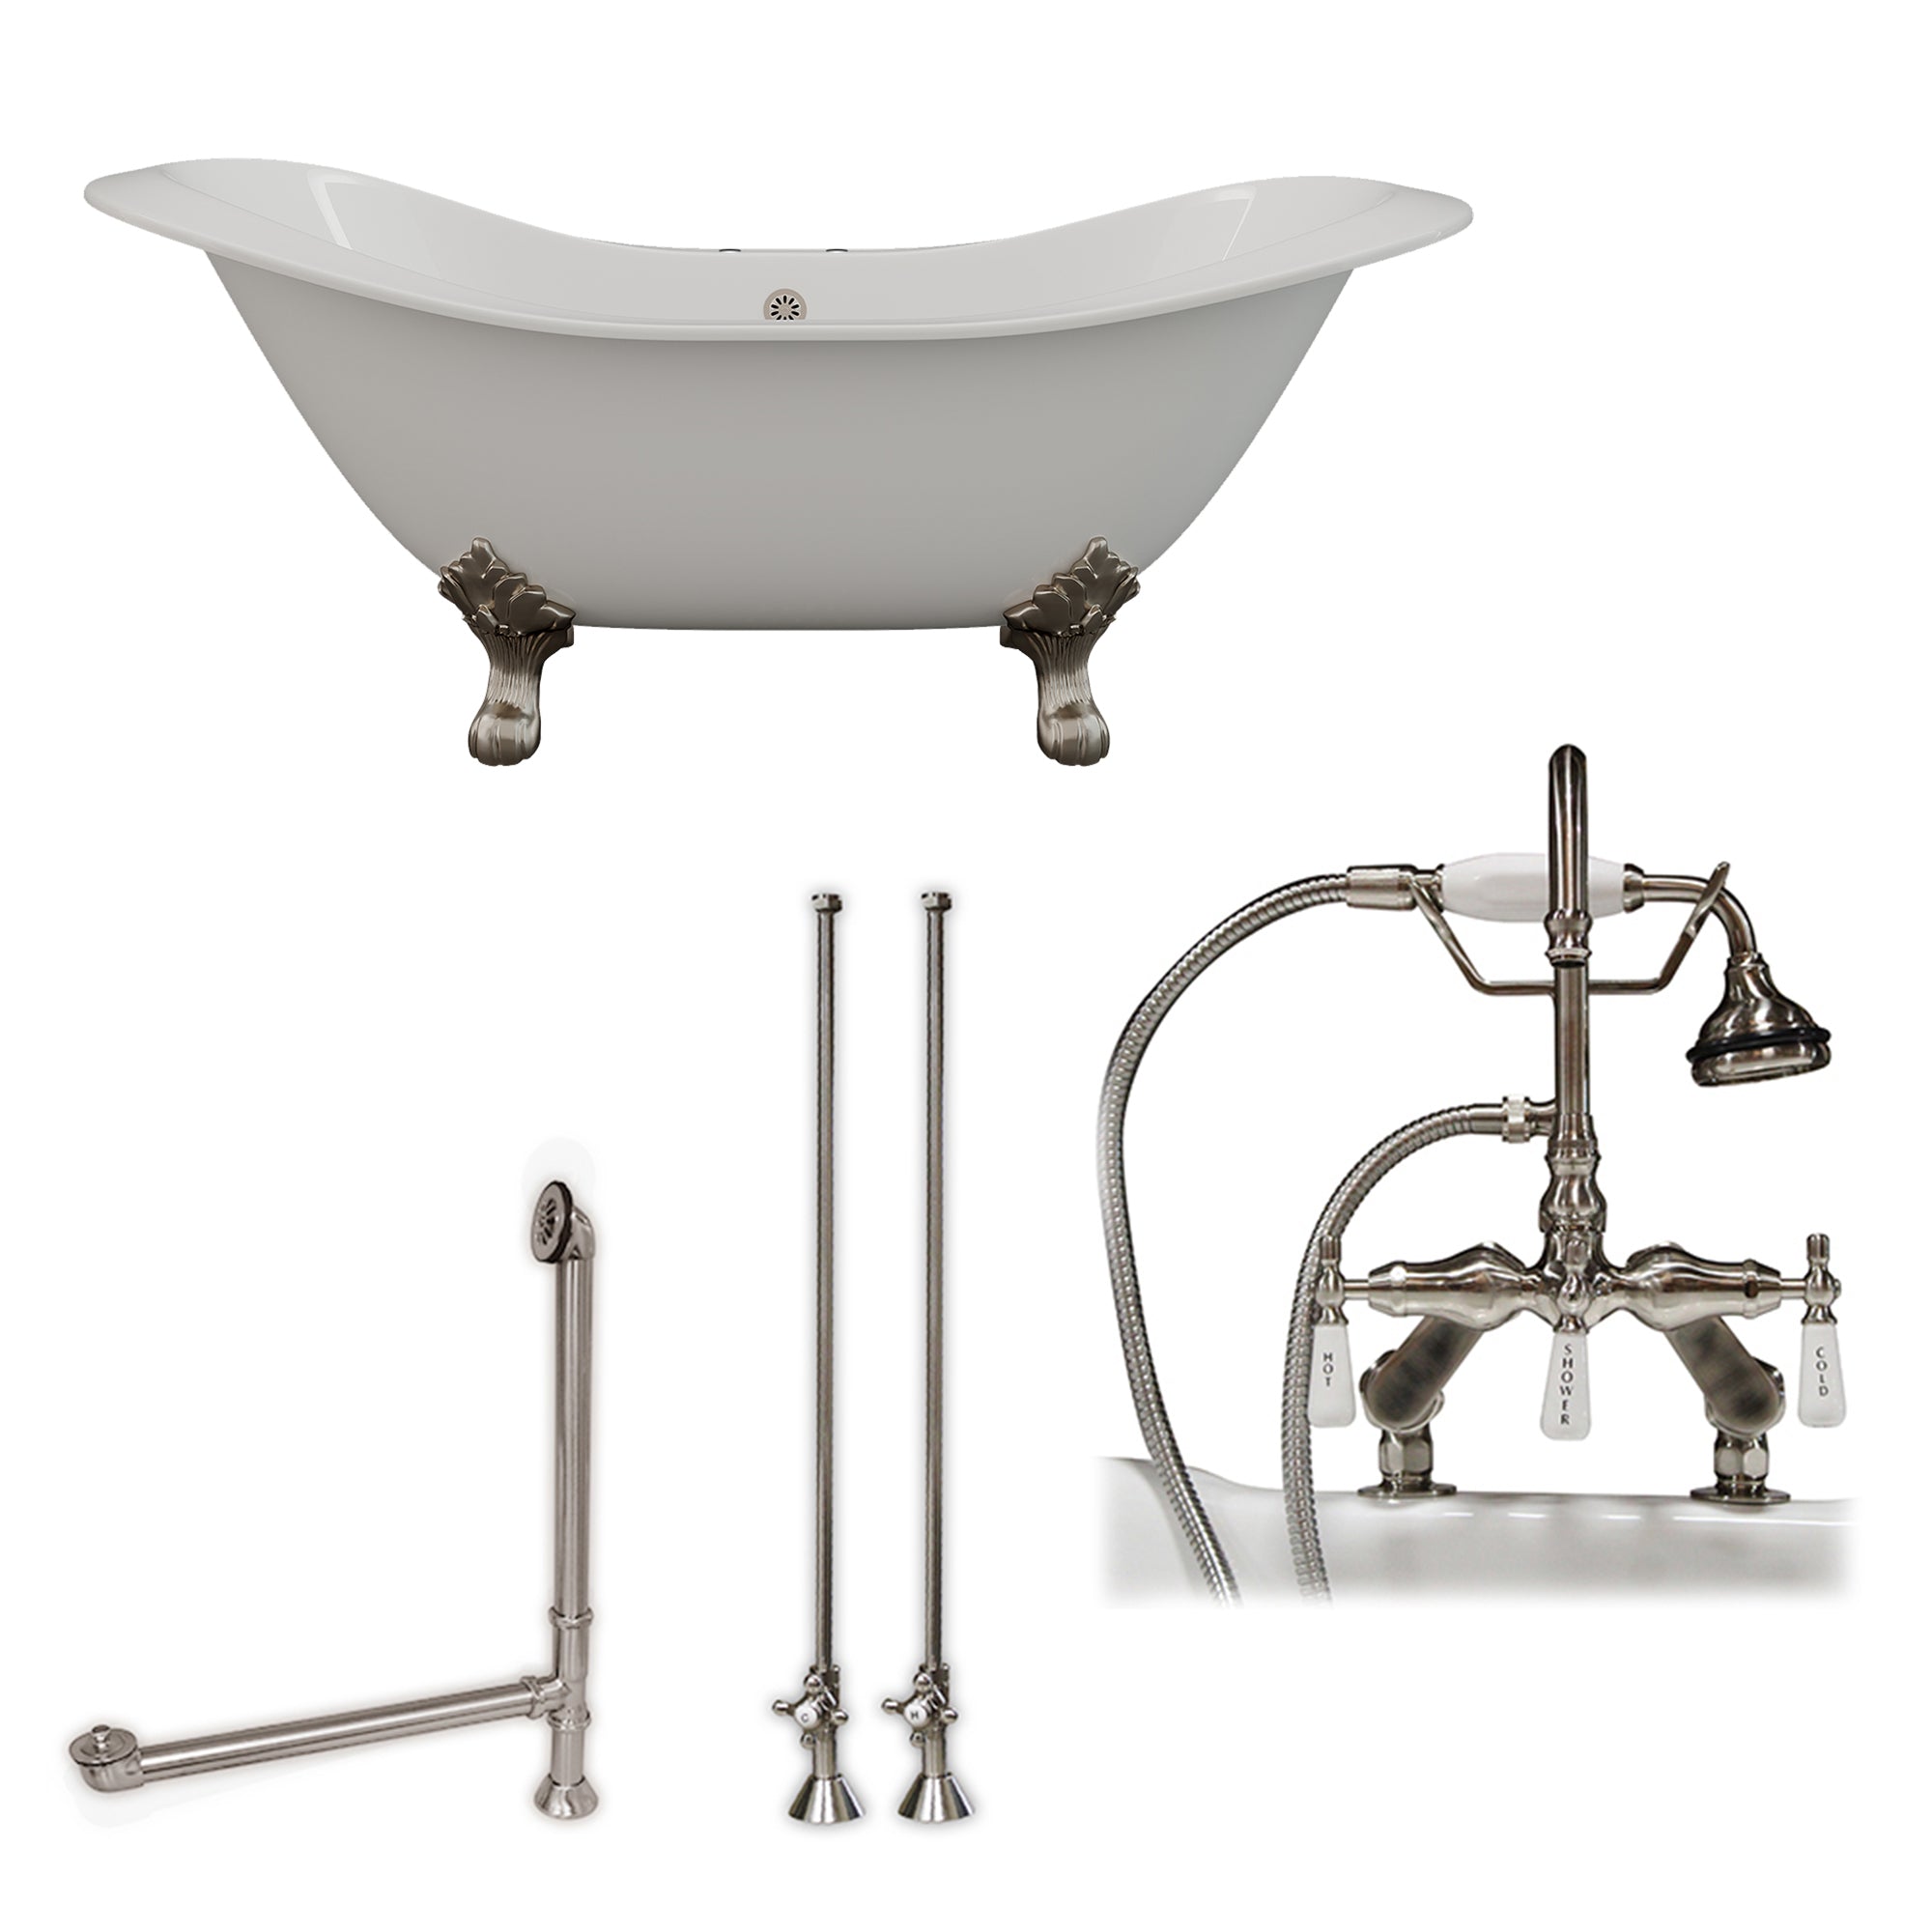 Cambridge Plumbing Double Slipper Cast Iron Soaking Tub (Porcelain interior and white paint exterior) with Lion’s Paw Feet and Deck Mount Plumbing Package (Brushed nickel) DES-684D-PKG-7DH - Vital Hydrotherapy